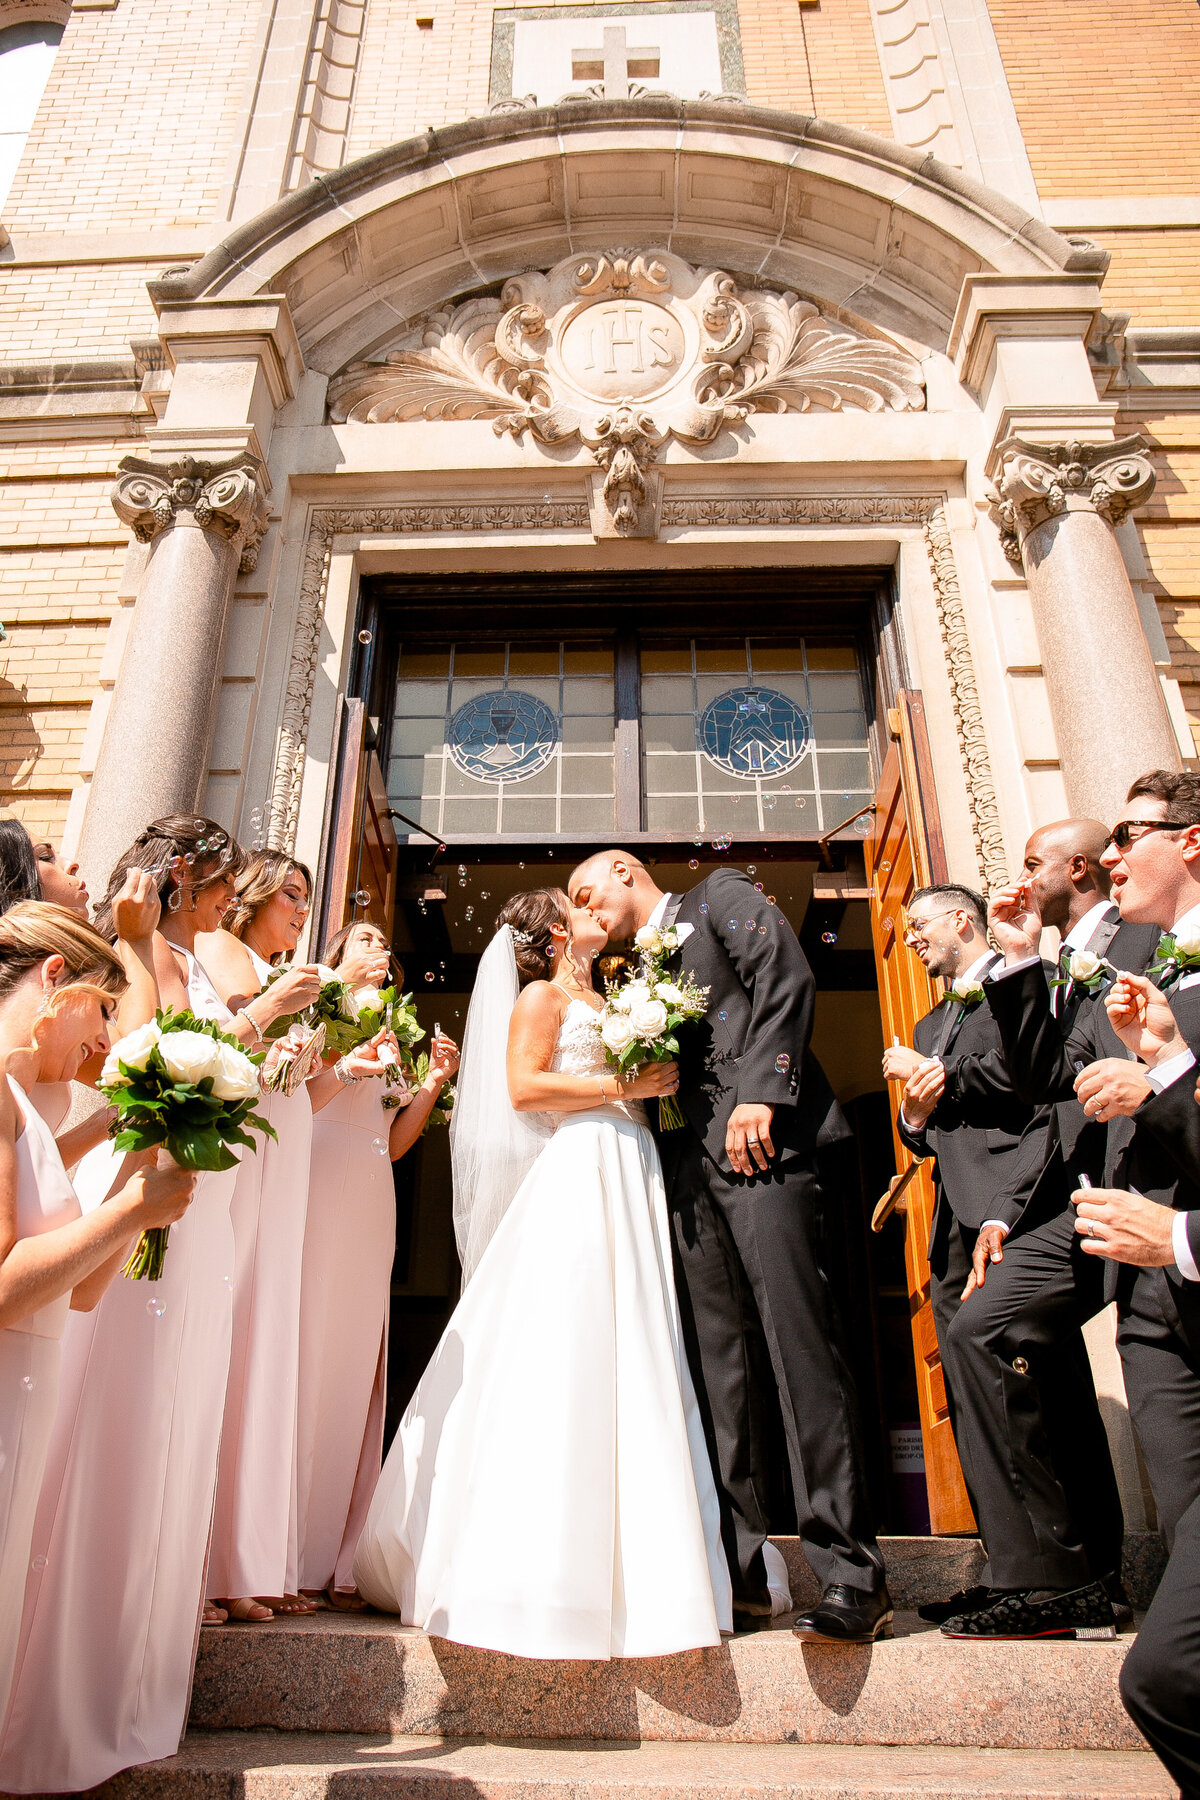 Newlyweds kiss as they leave the church and their wedding party blow bubbles.